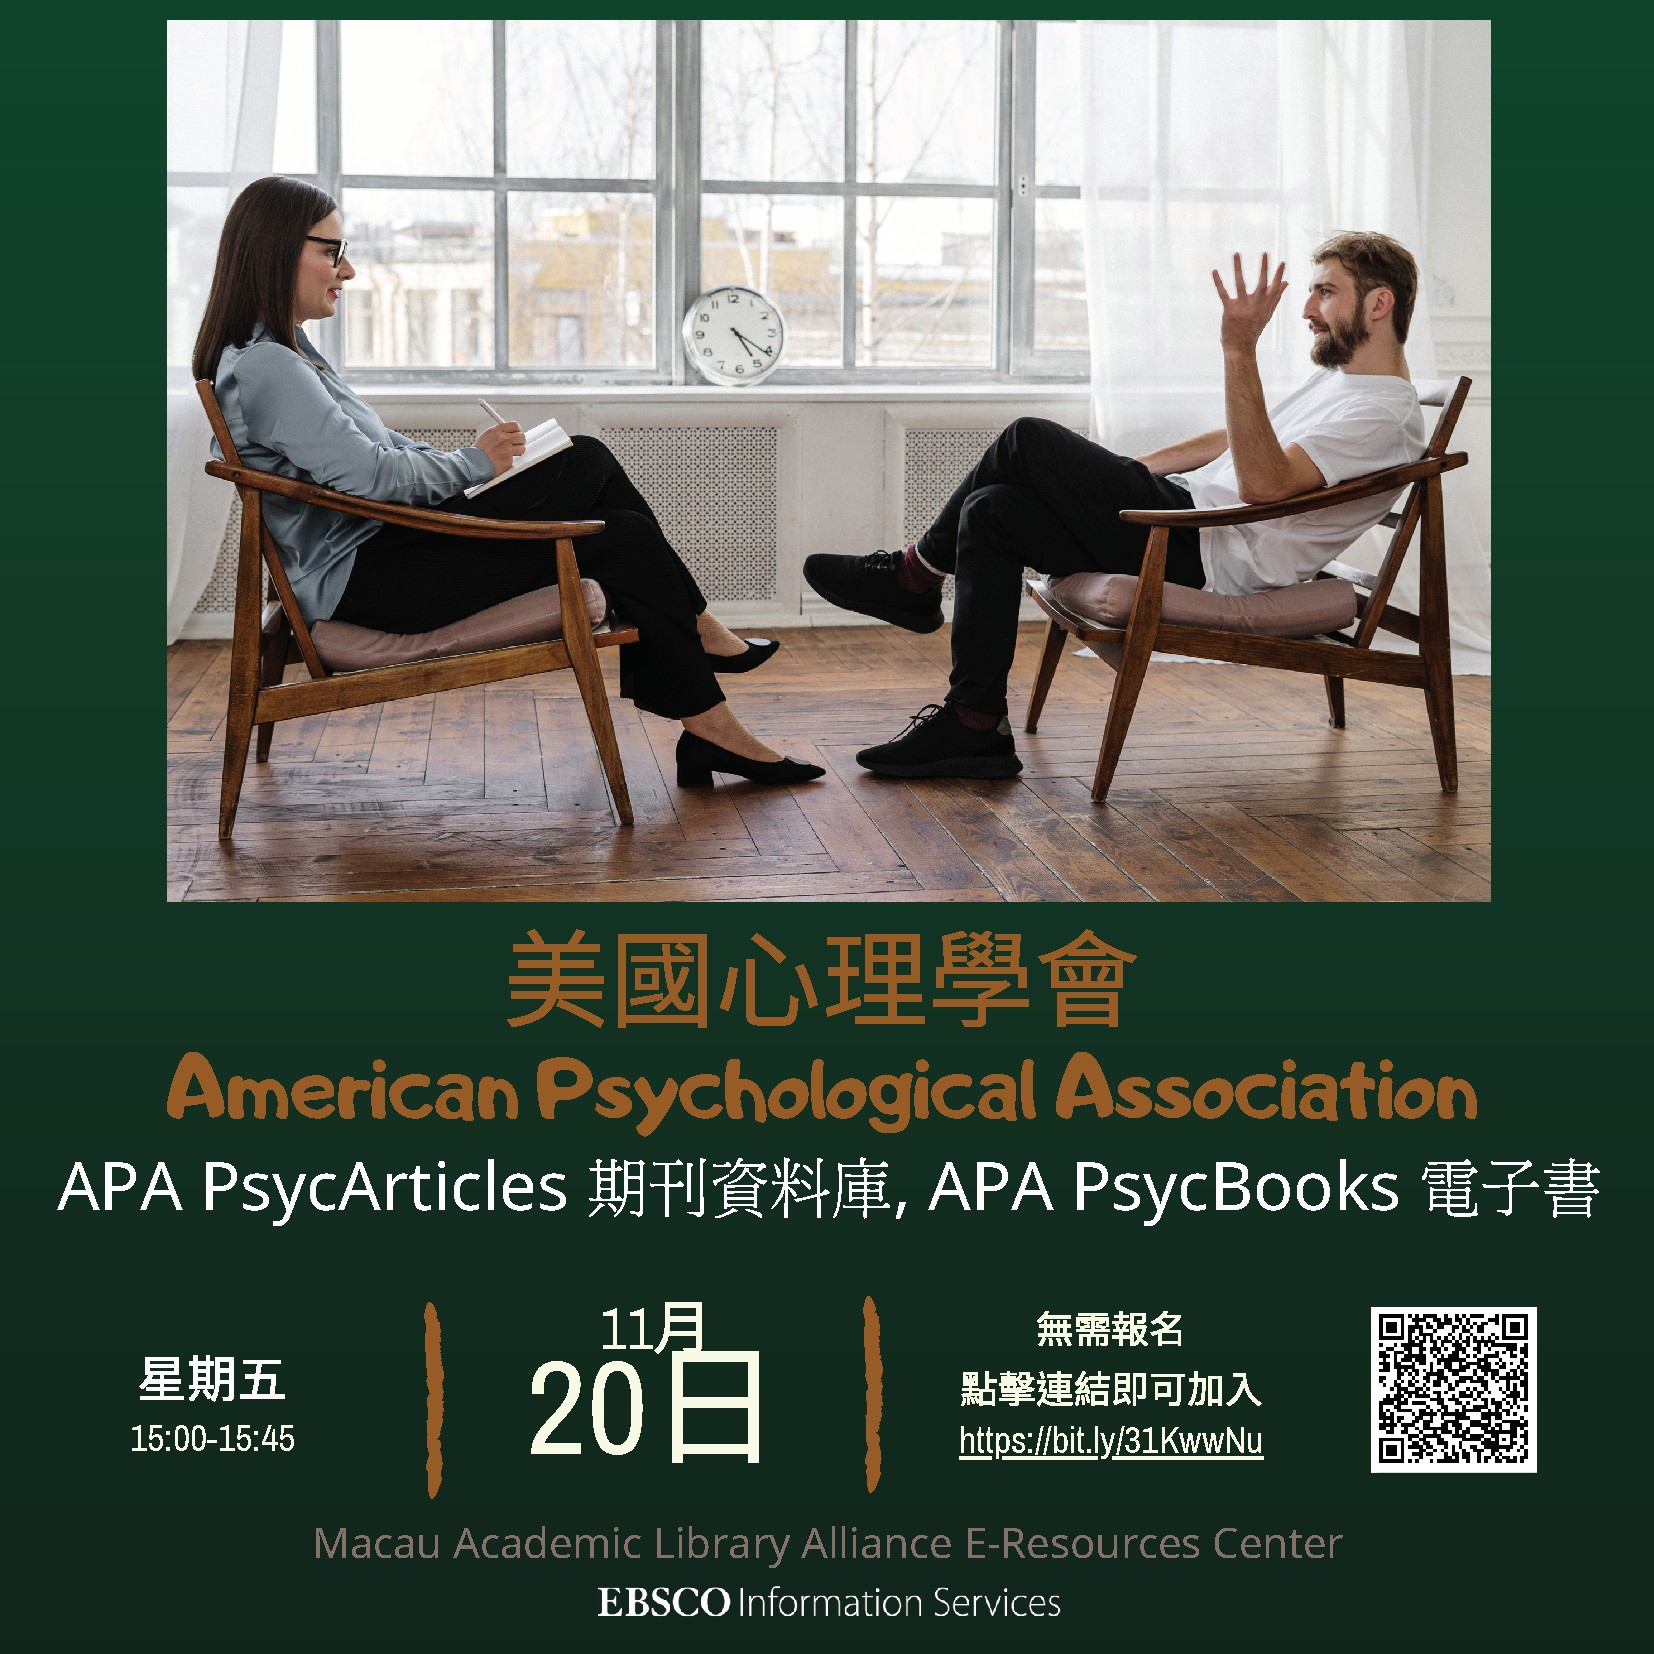 EBSCO Databases Online Training Sessions - APA PsycArticles, APA PsycBooks (Chinese Session)